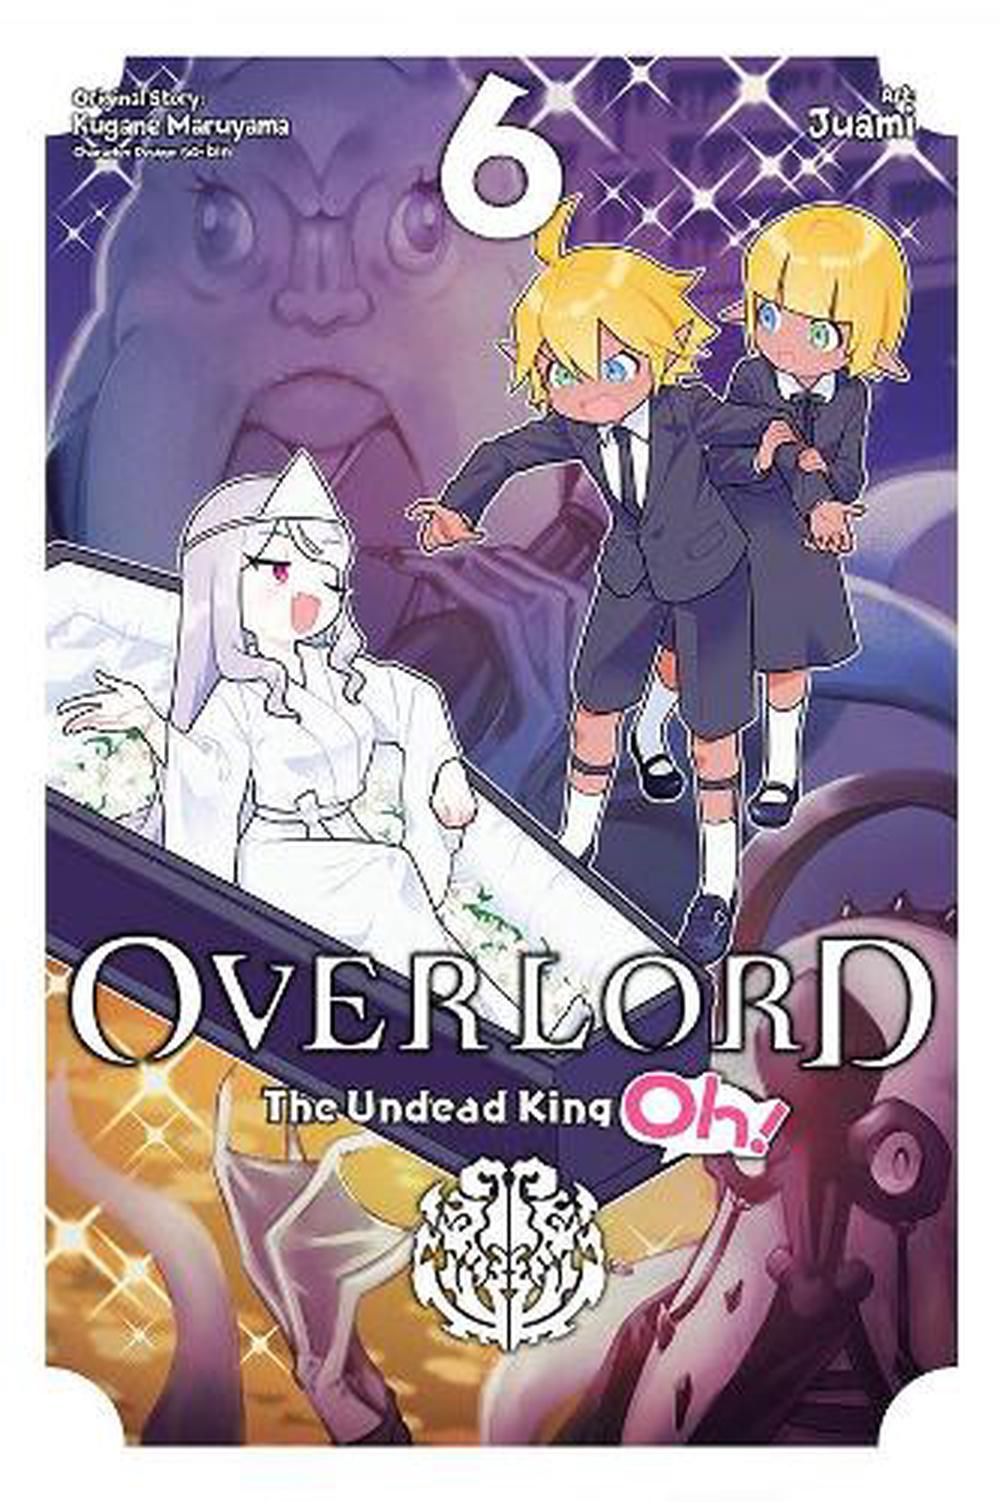 Overlord The Undead King Oh Vol 6 By Kugane Maruyama Paperback Buy Online At The Nile